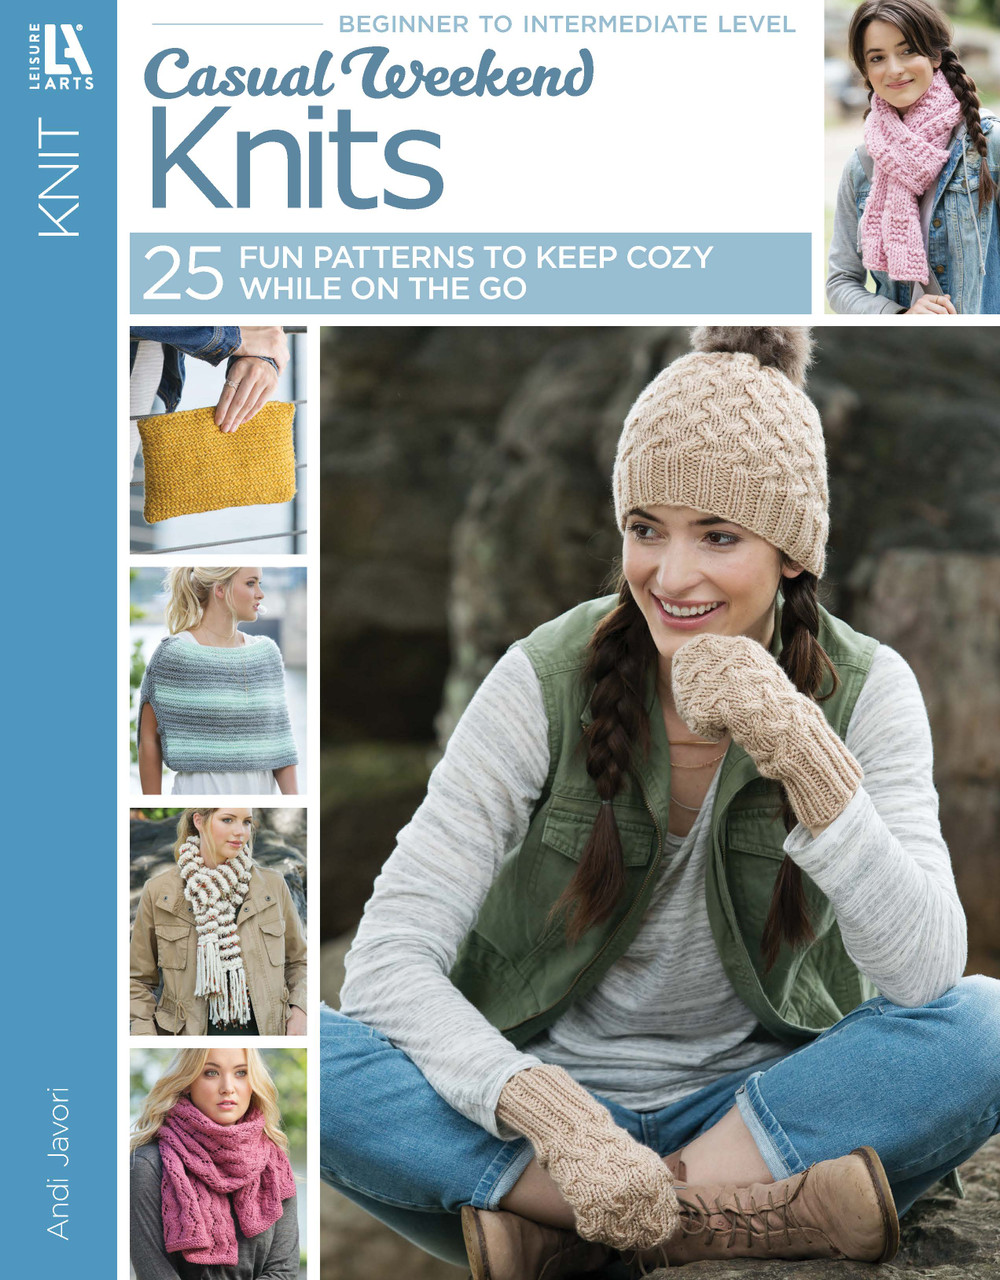 Casual Weekend Knits Book